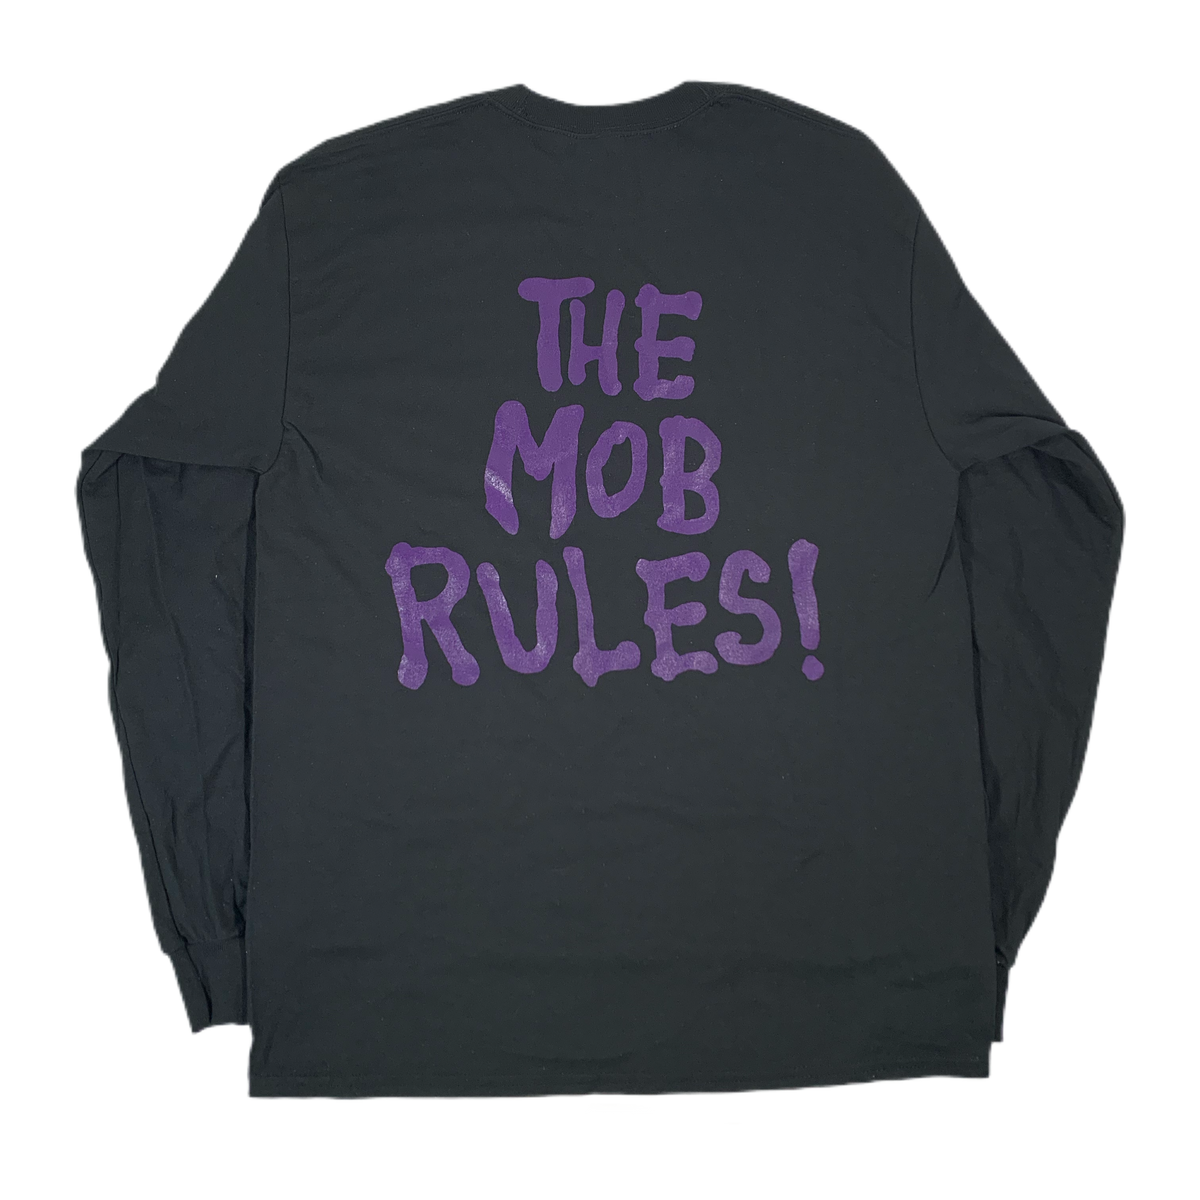 Vintage The Rival Mob “The Mob Rules!” Long Sleeve Shirt - jointcustodydc